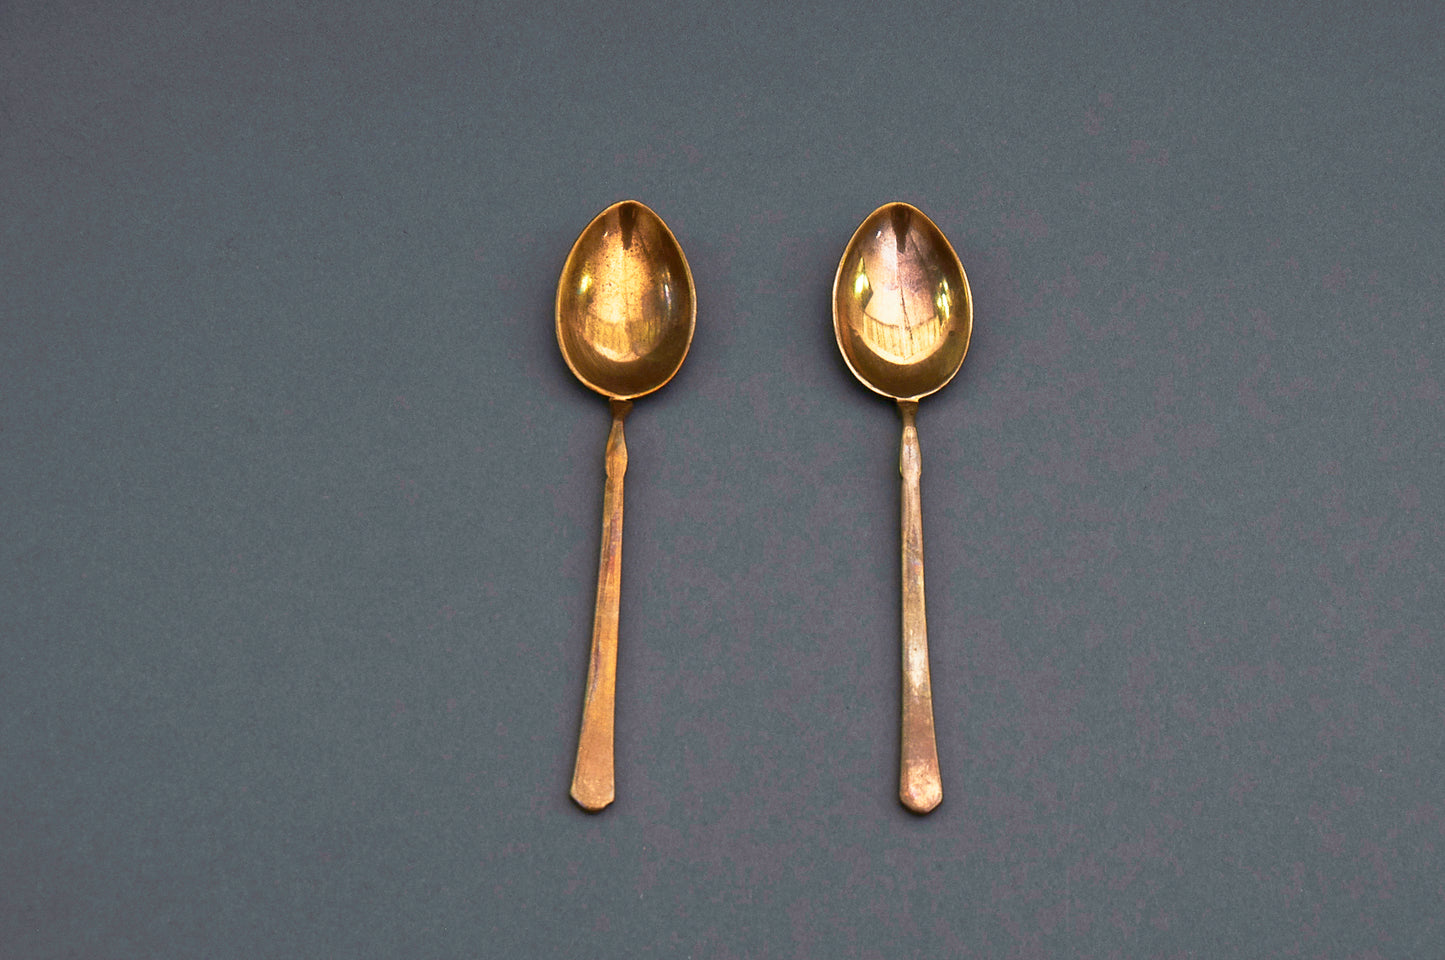 The Headhunter Cara - Pair of Enamel Decorated Coffee Spoons